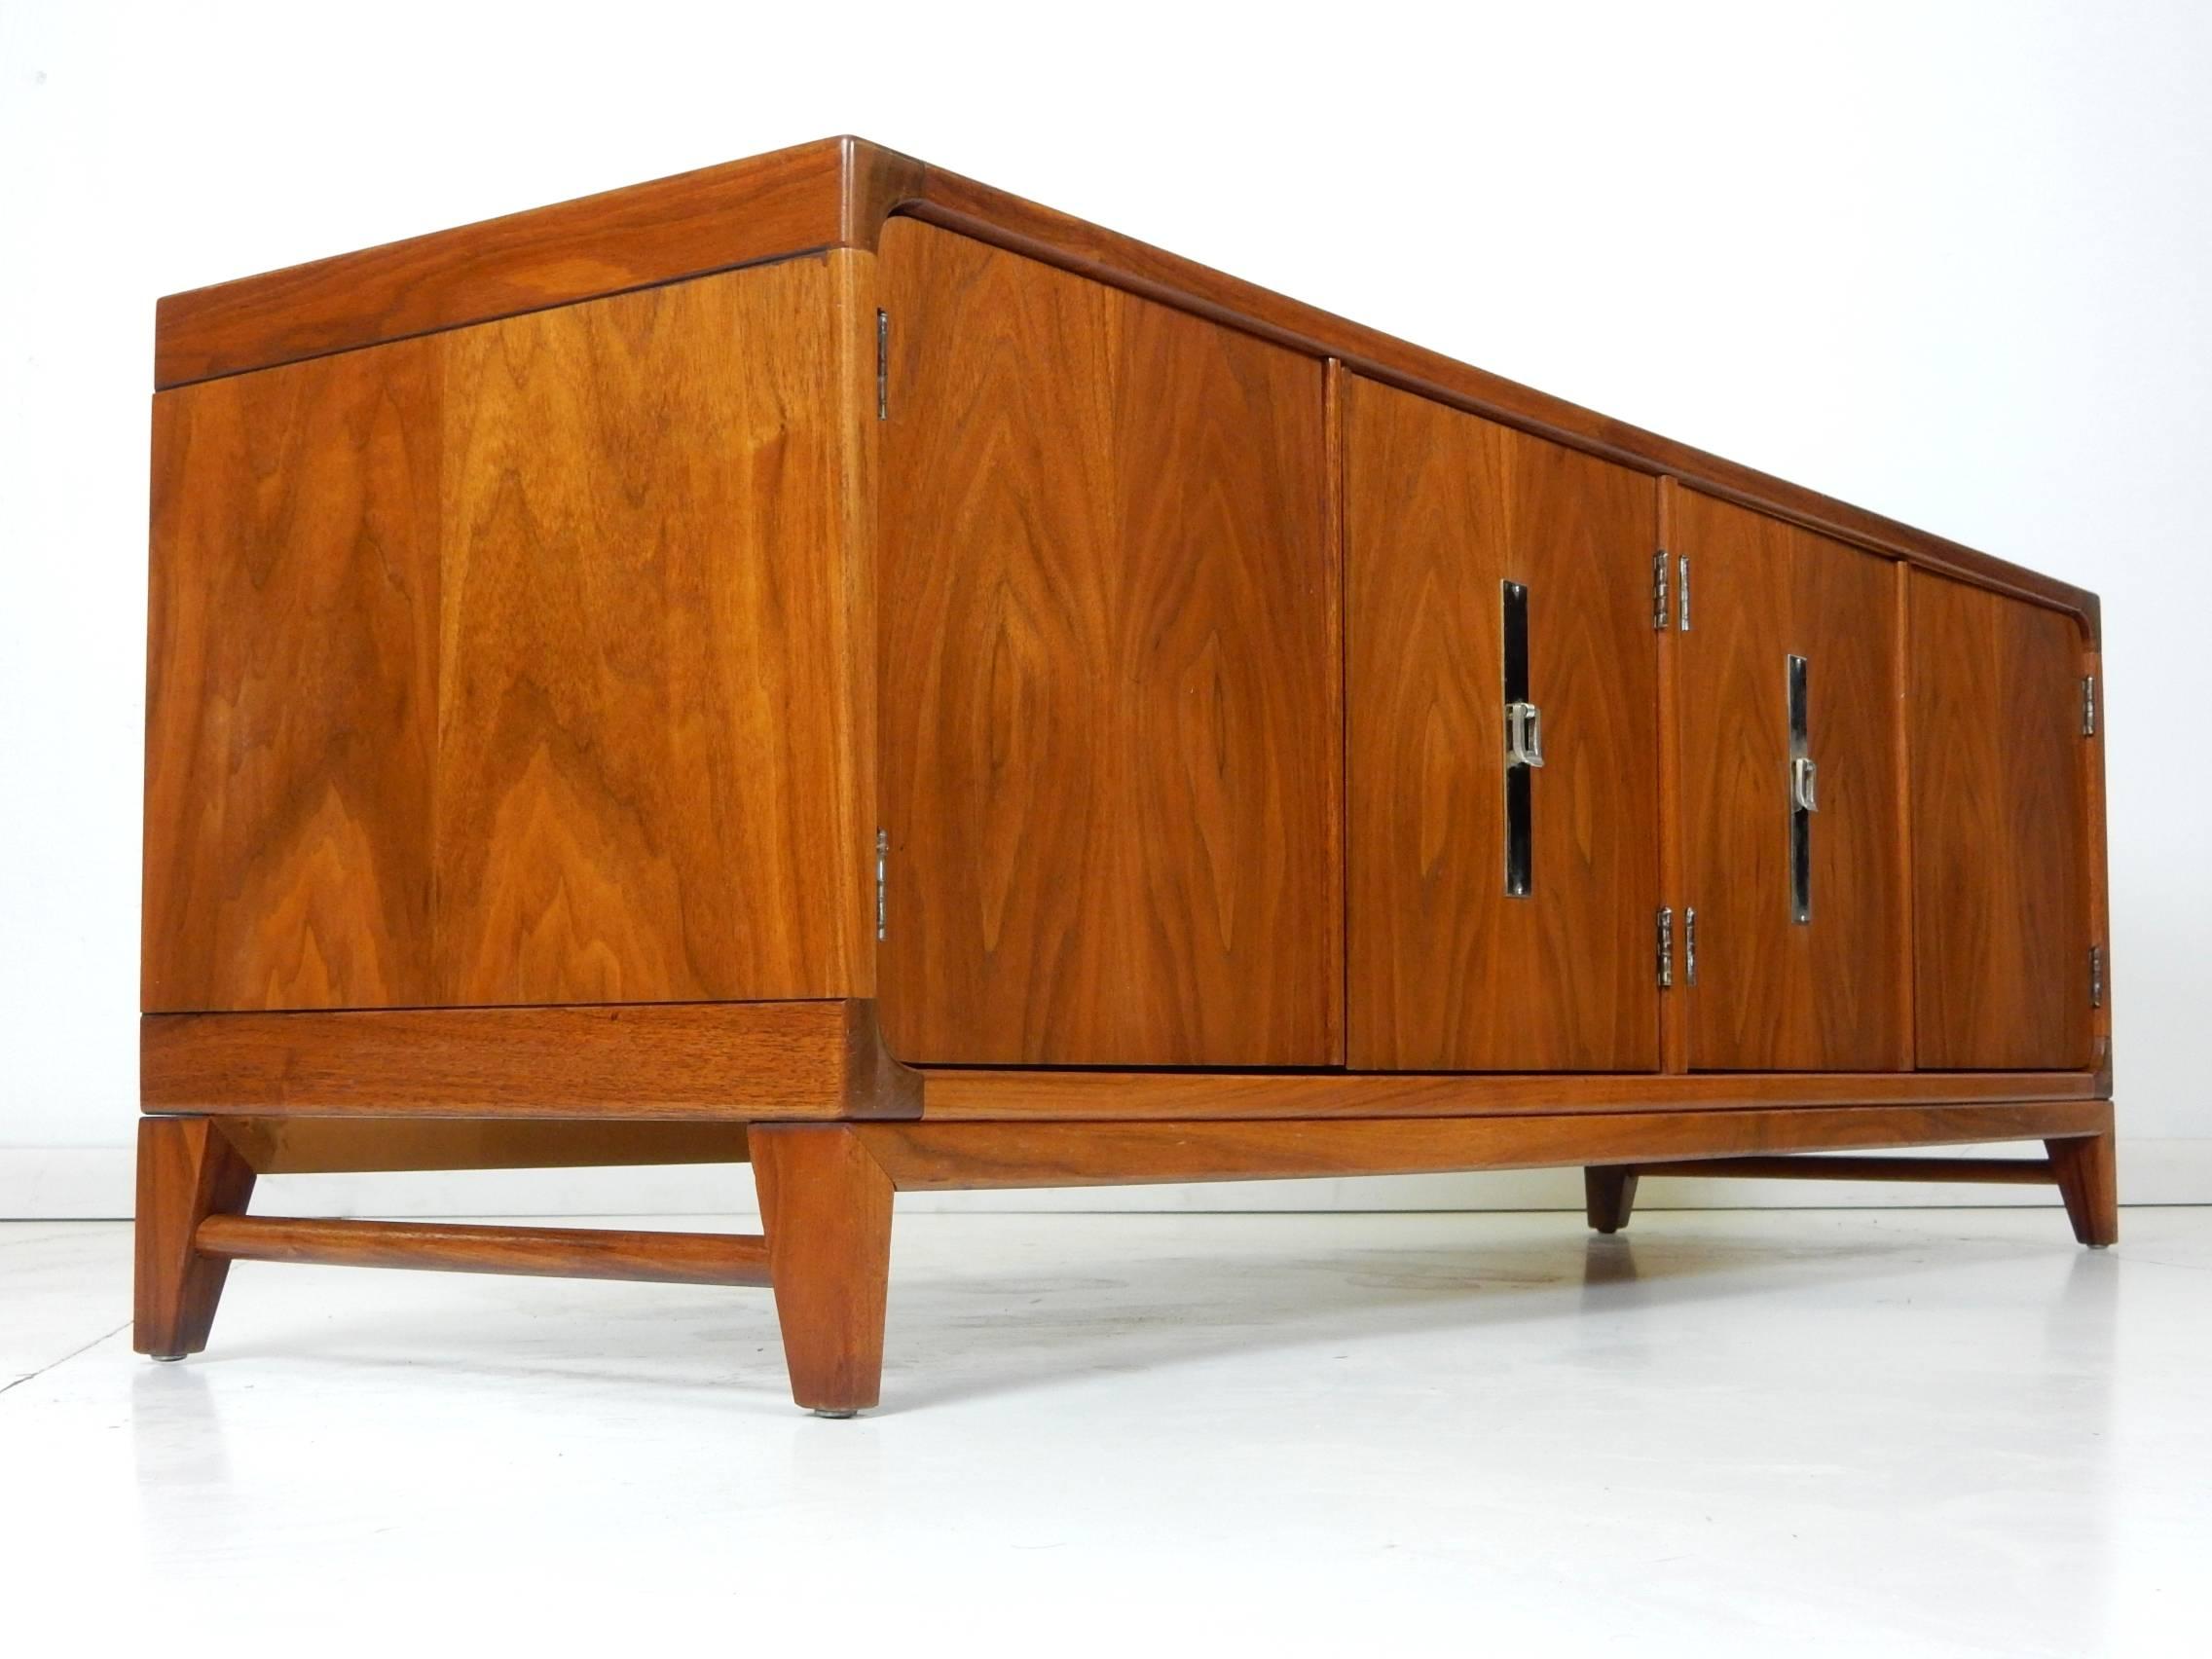 Incredible midcentury four-door cabinet designed by John Keal for Brown-Saltman.
Gorgeous walnut grain throughout. Nickel-plated pulls and back plate.
Exceptionally versatile piece of furniture which could be used as a bench, entry way cabinet or